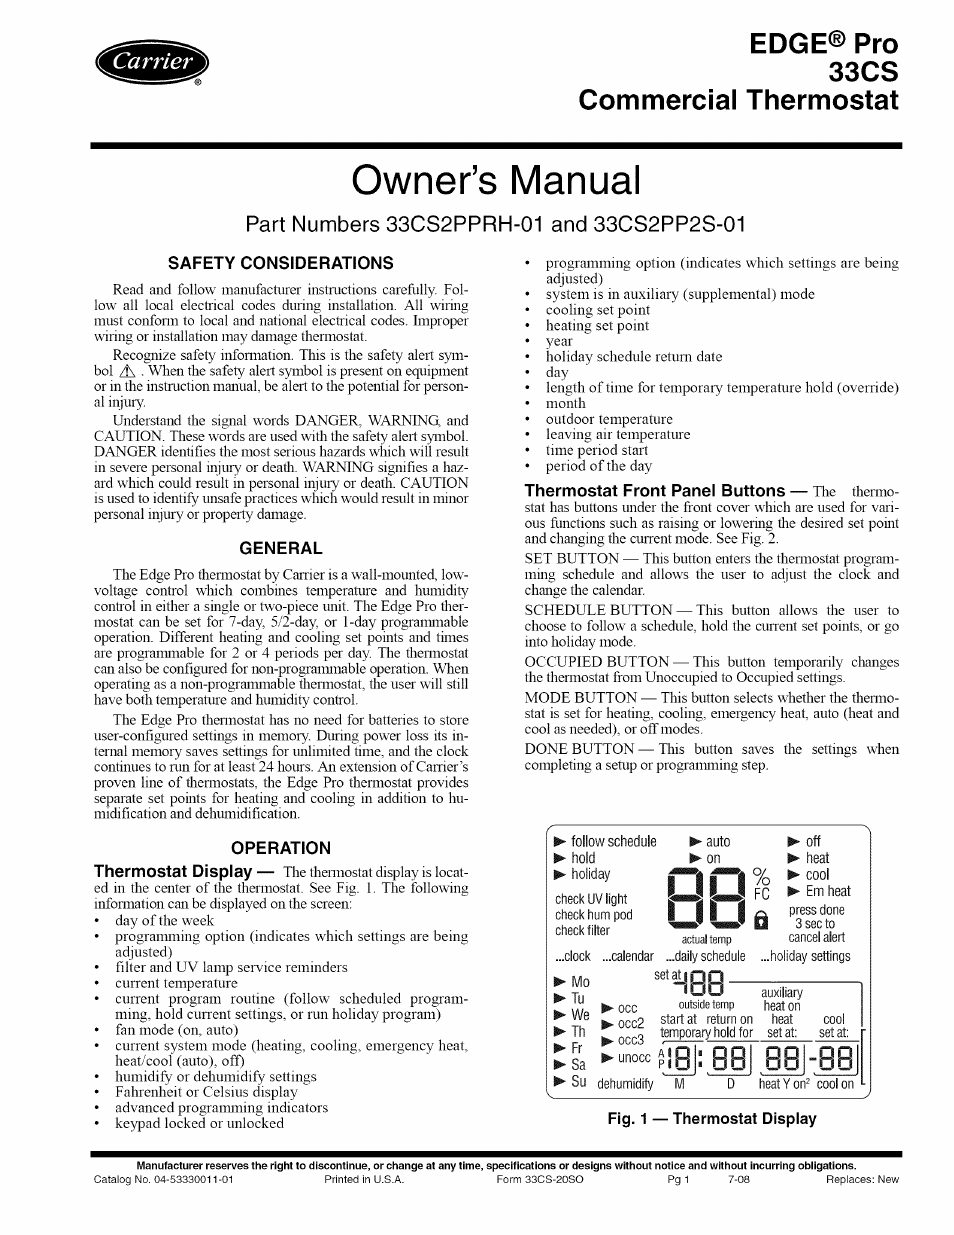 Carrier EDGE PRO 33CS User Manual | 7 pages